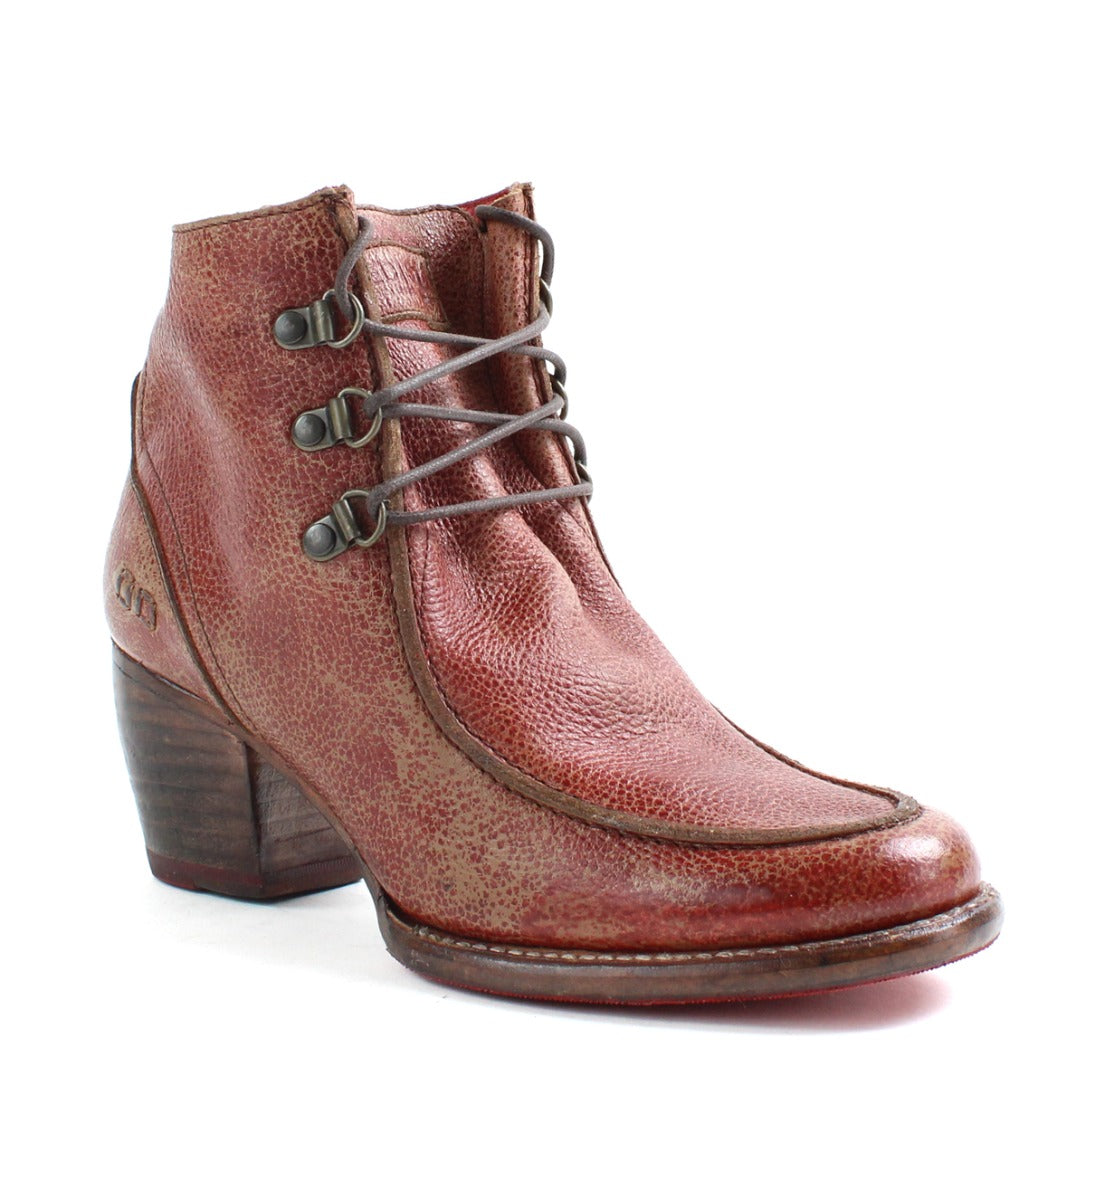 A women's distressed red ankle boot with a wooden heel called the Mage by Bed Stu.